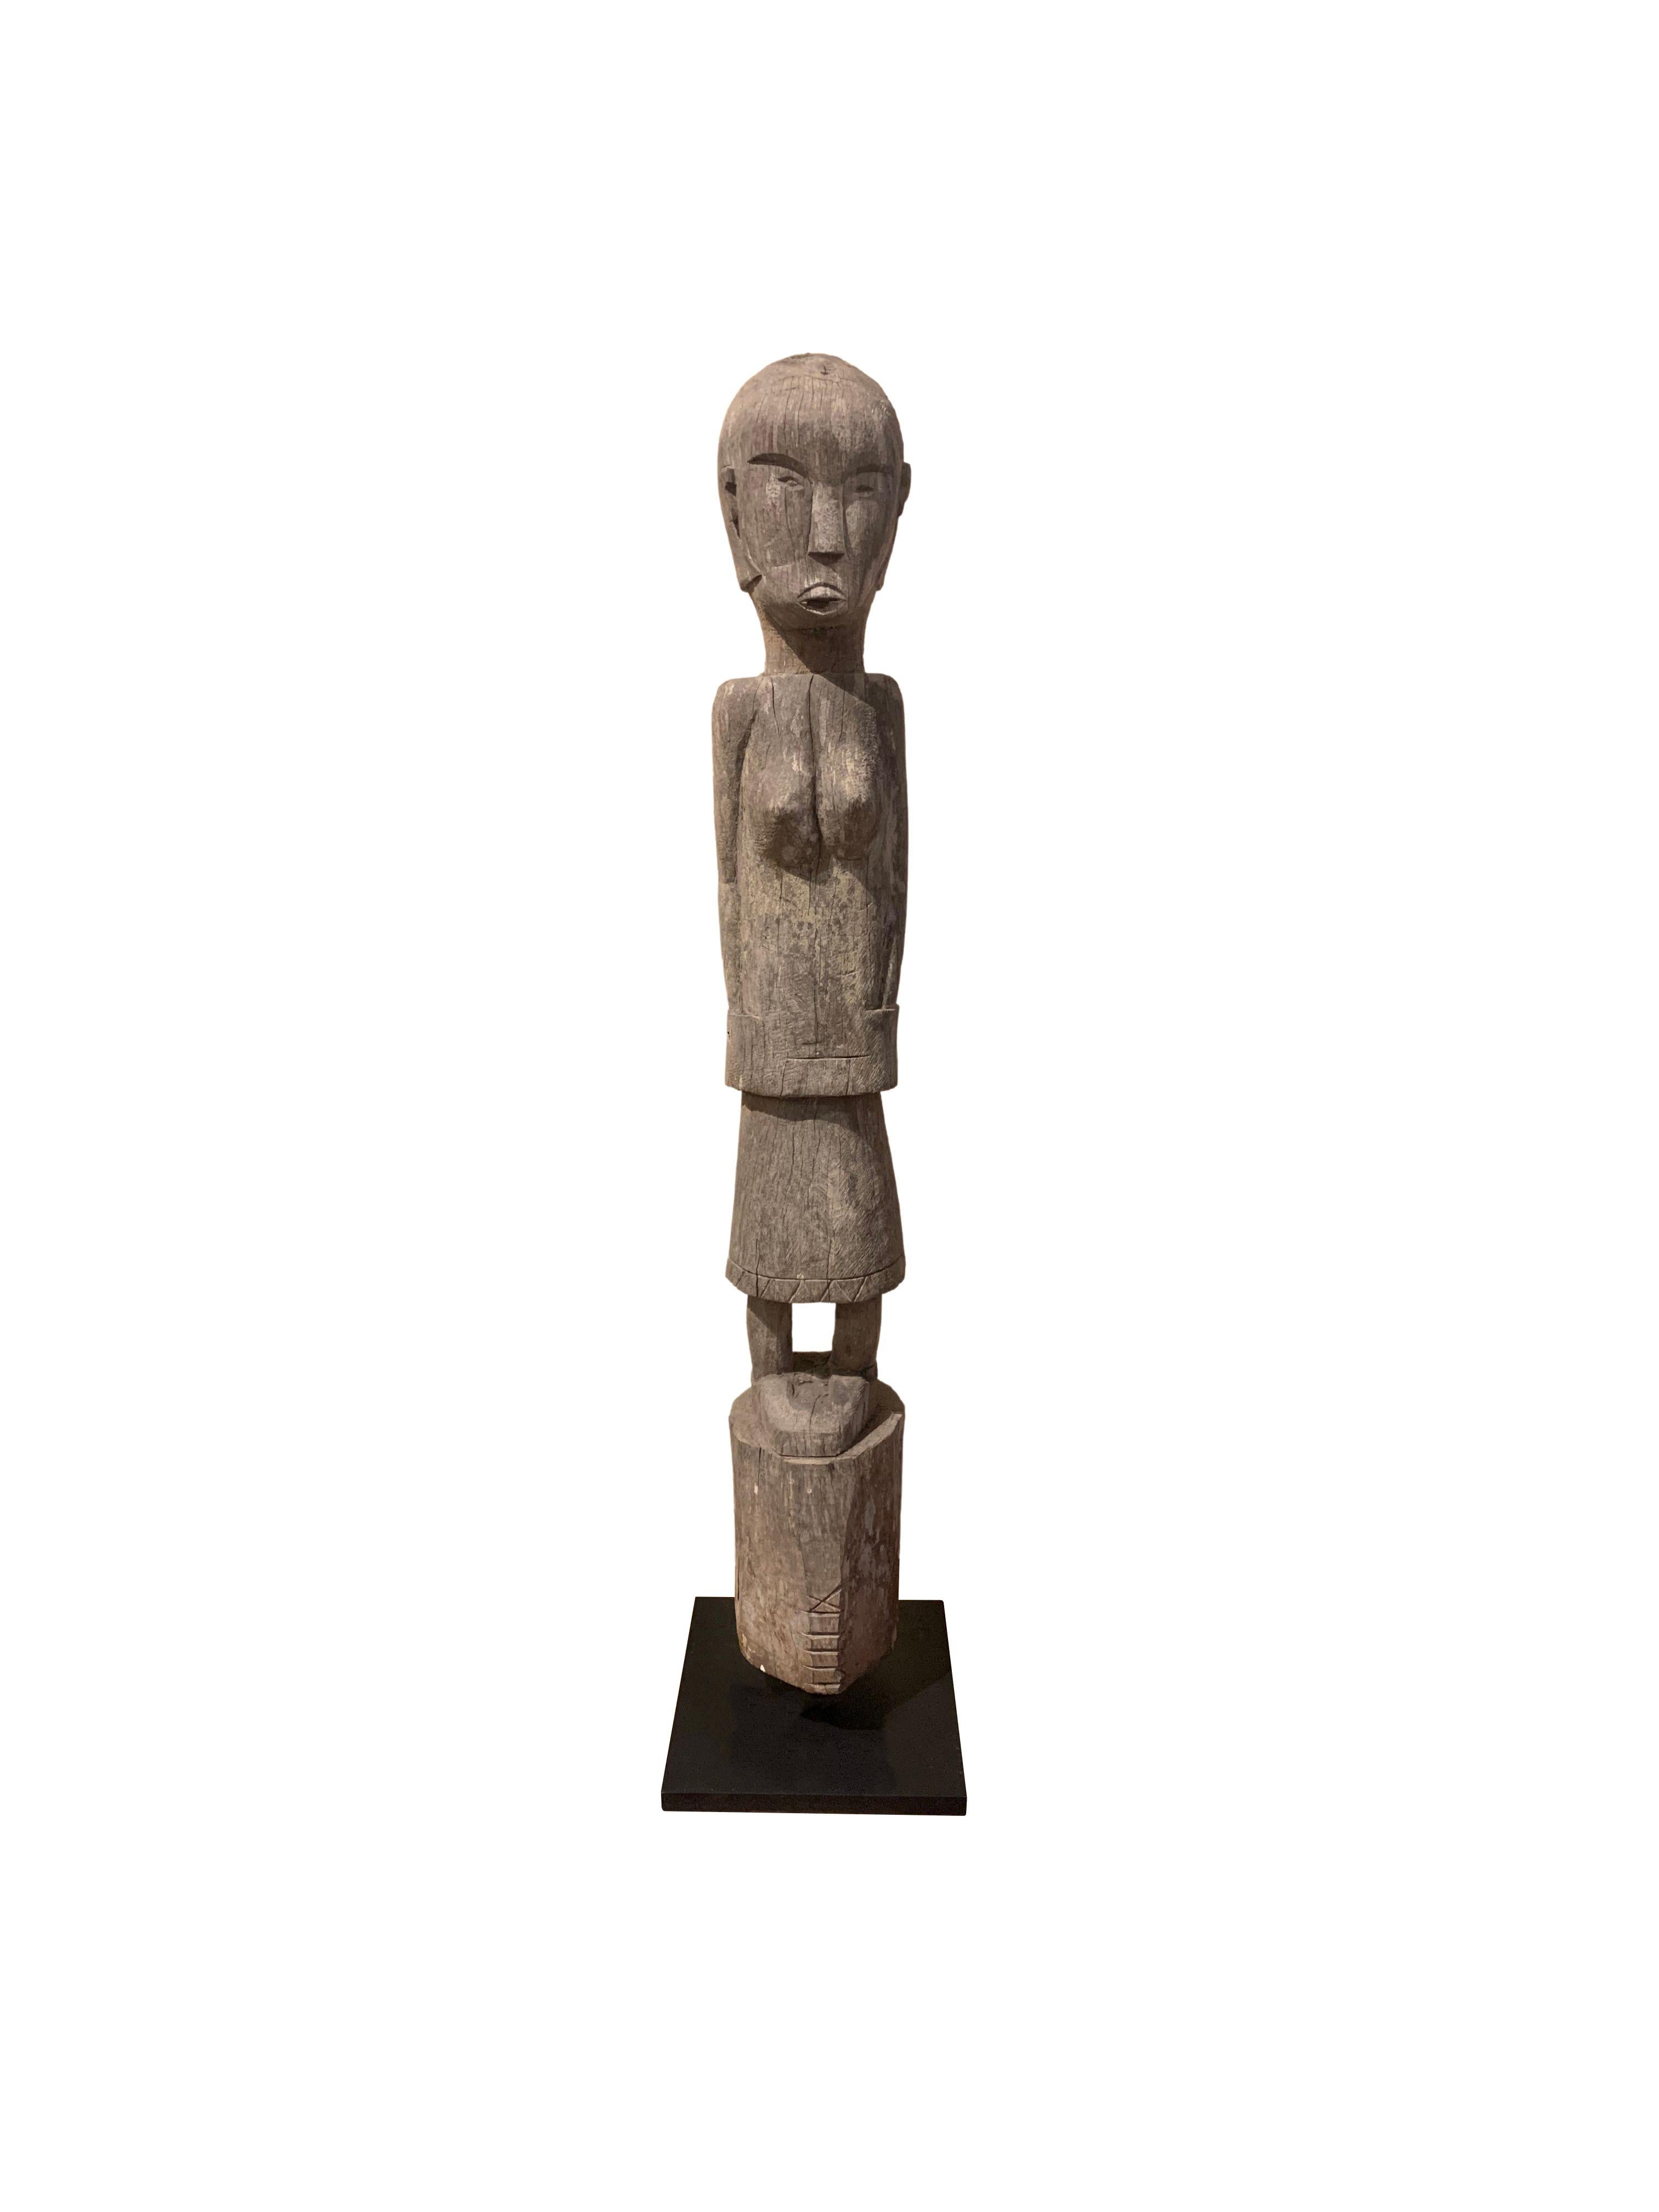 An exquisite example Kalimantan carved sculpture of a 